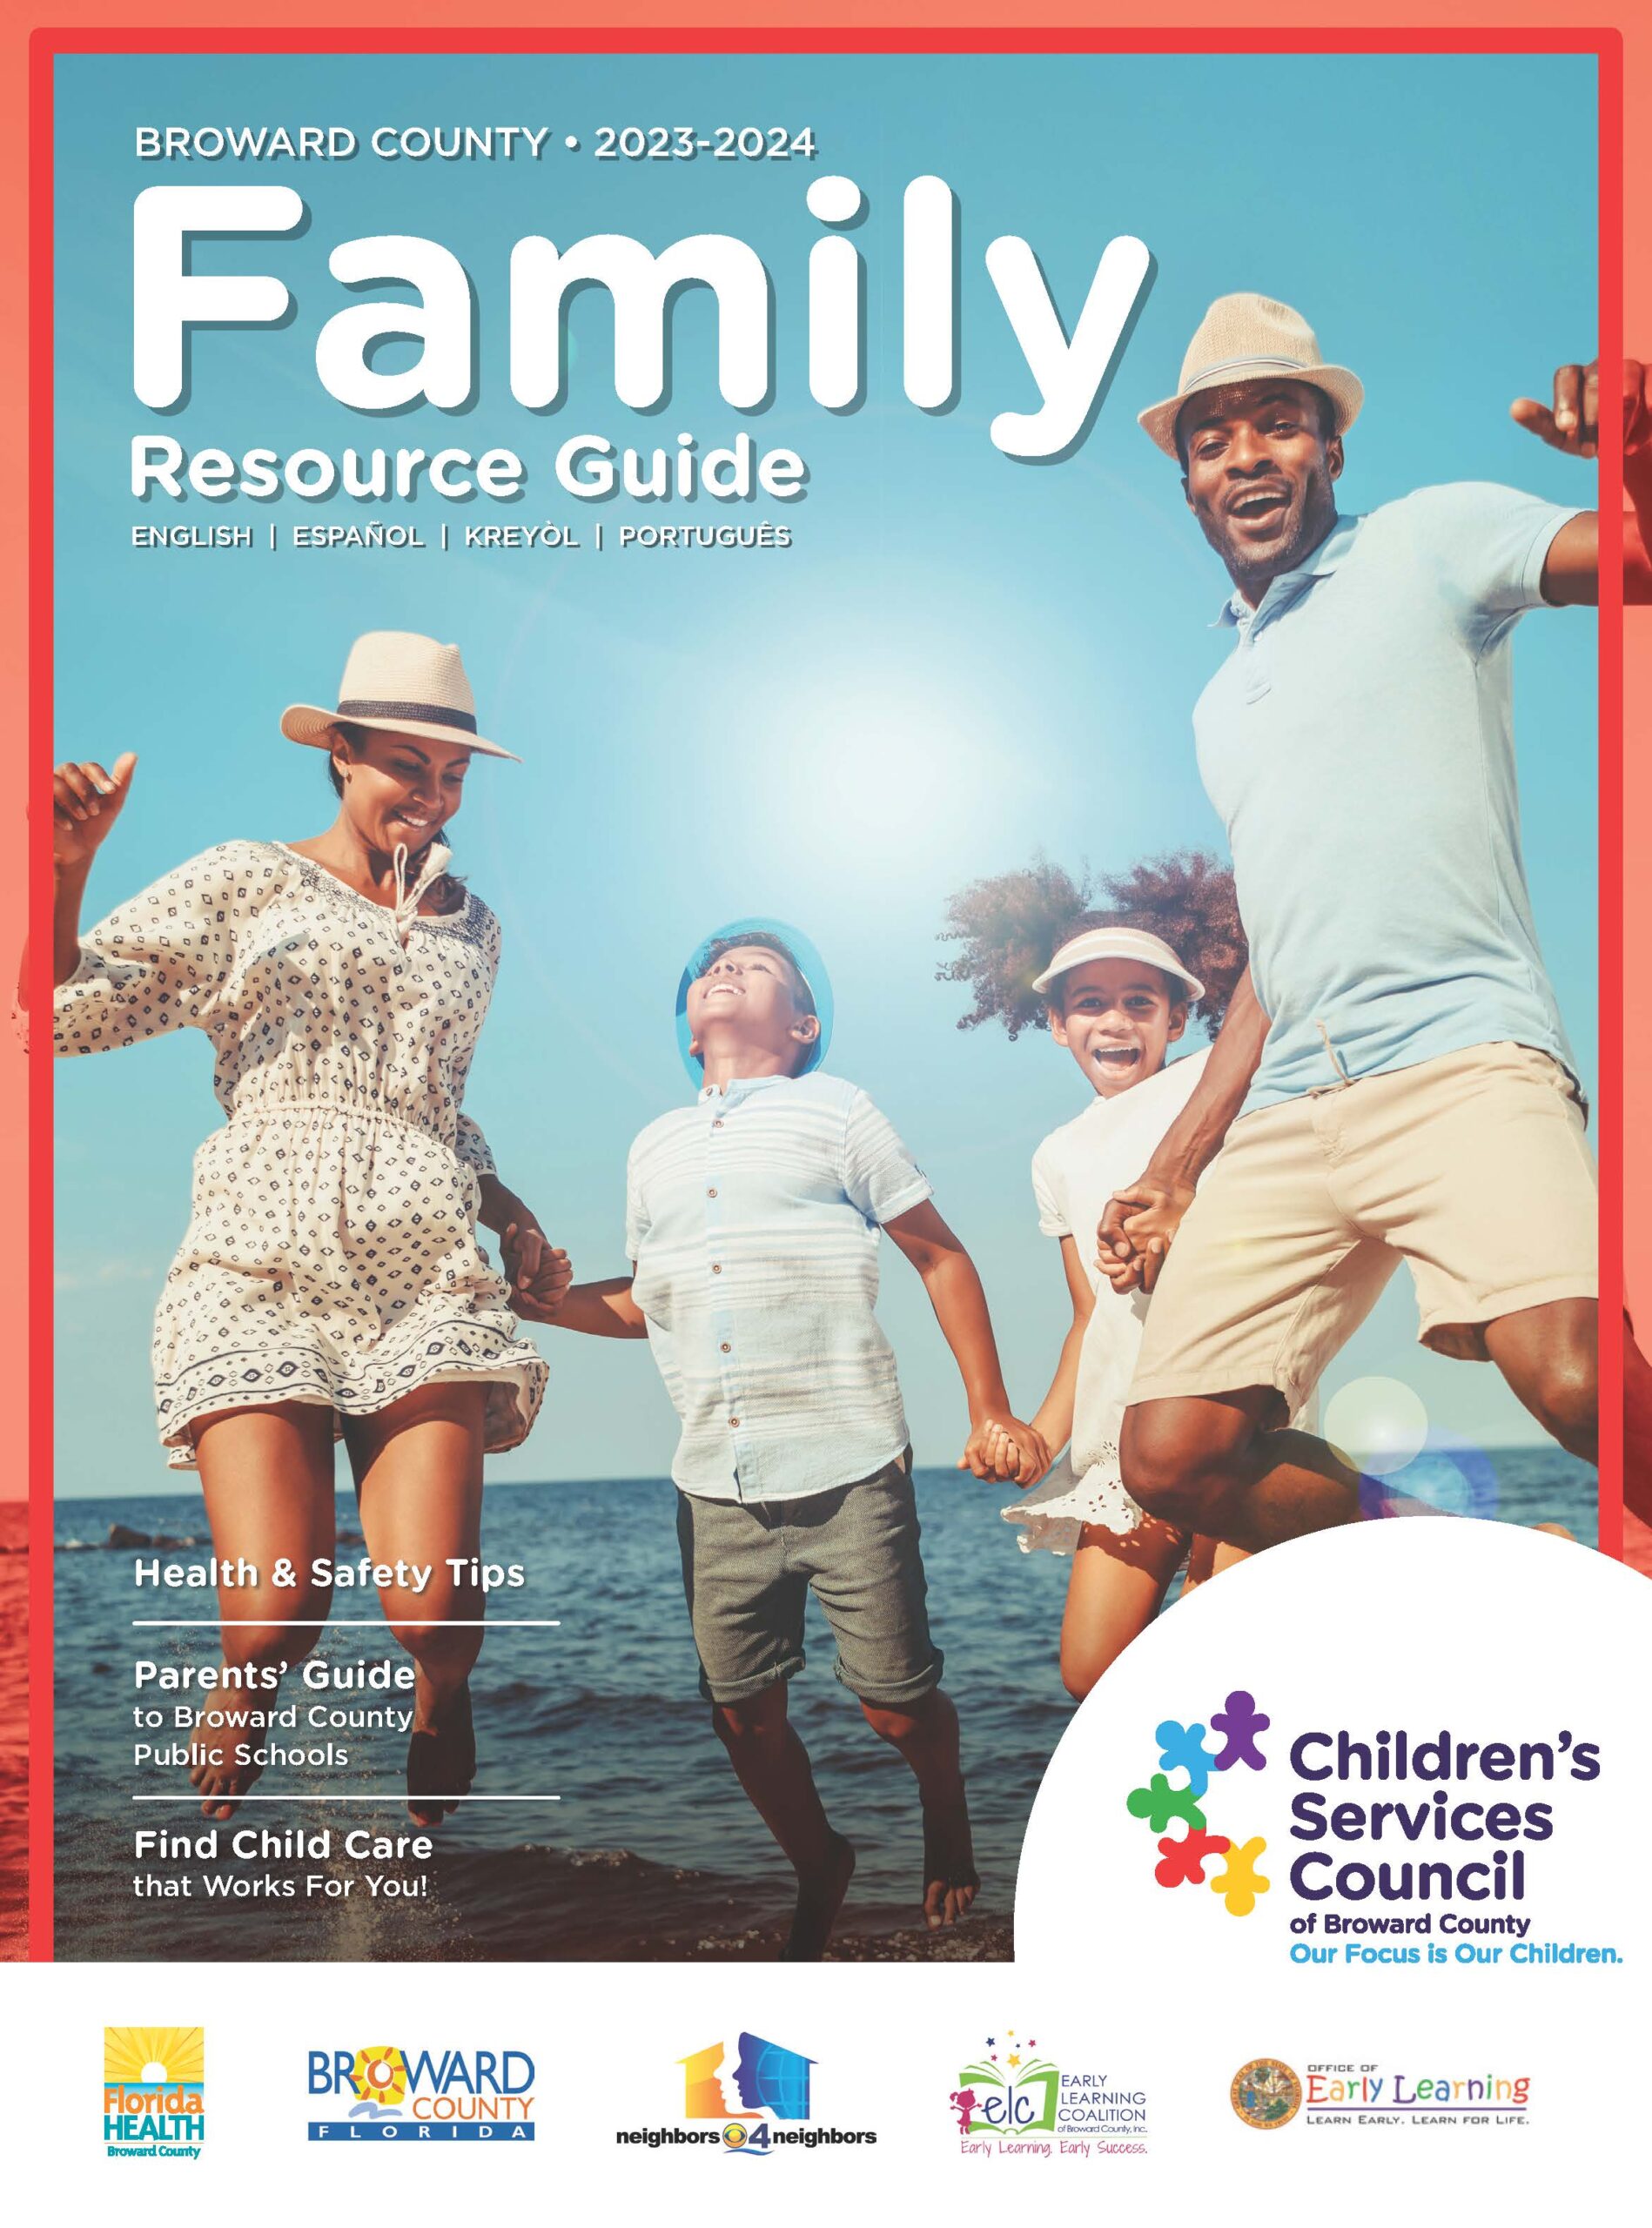 Family Resource Guide images